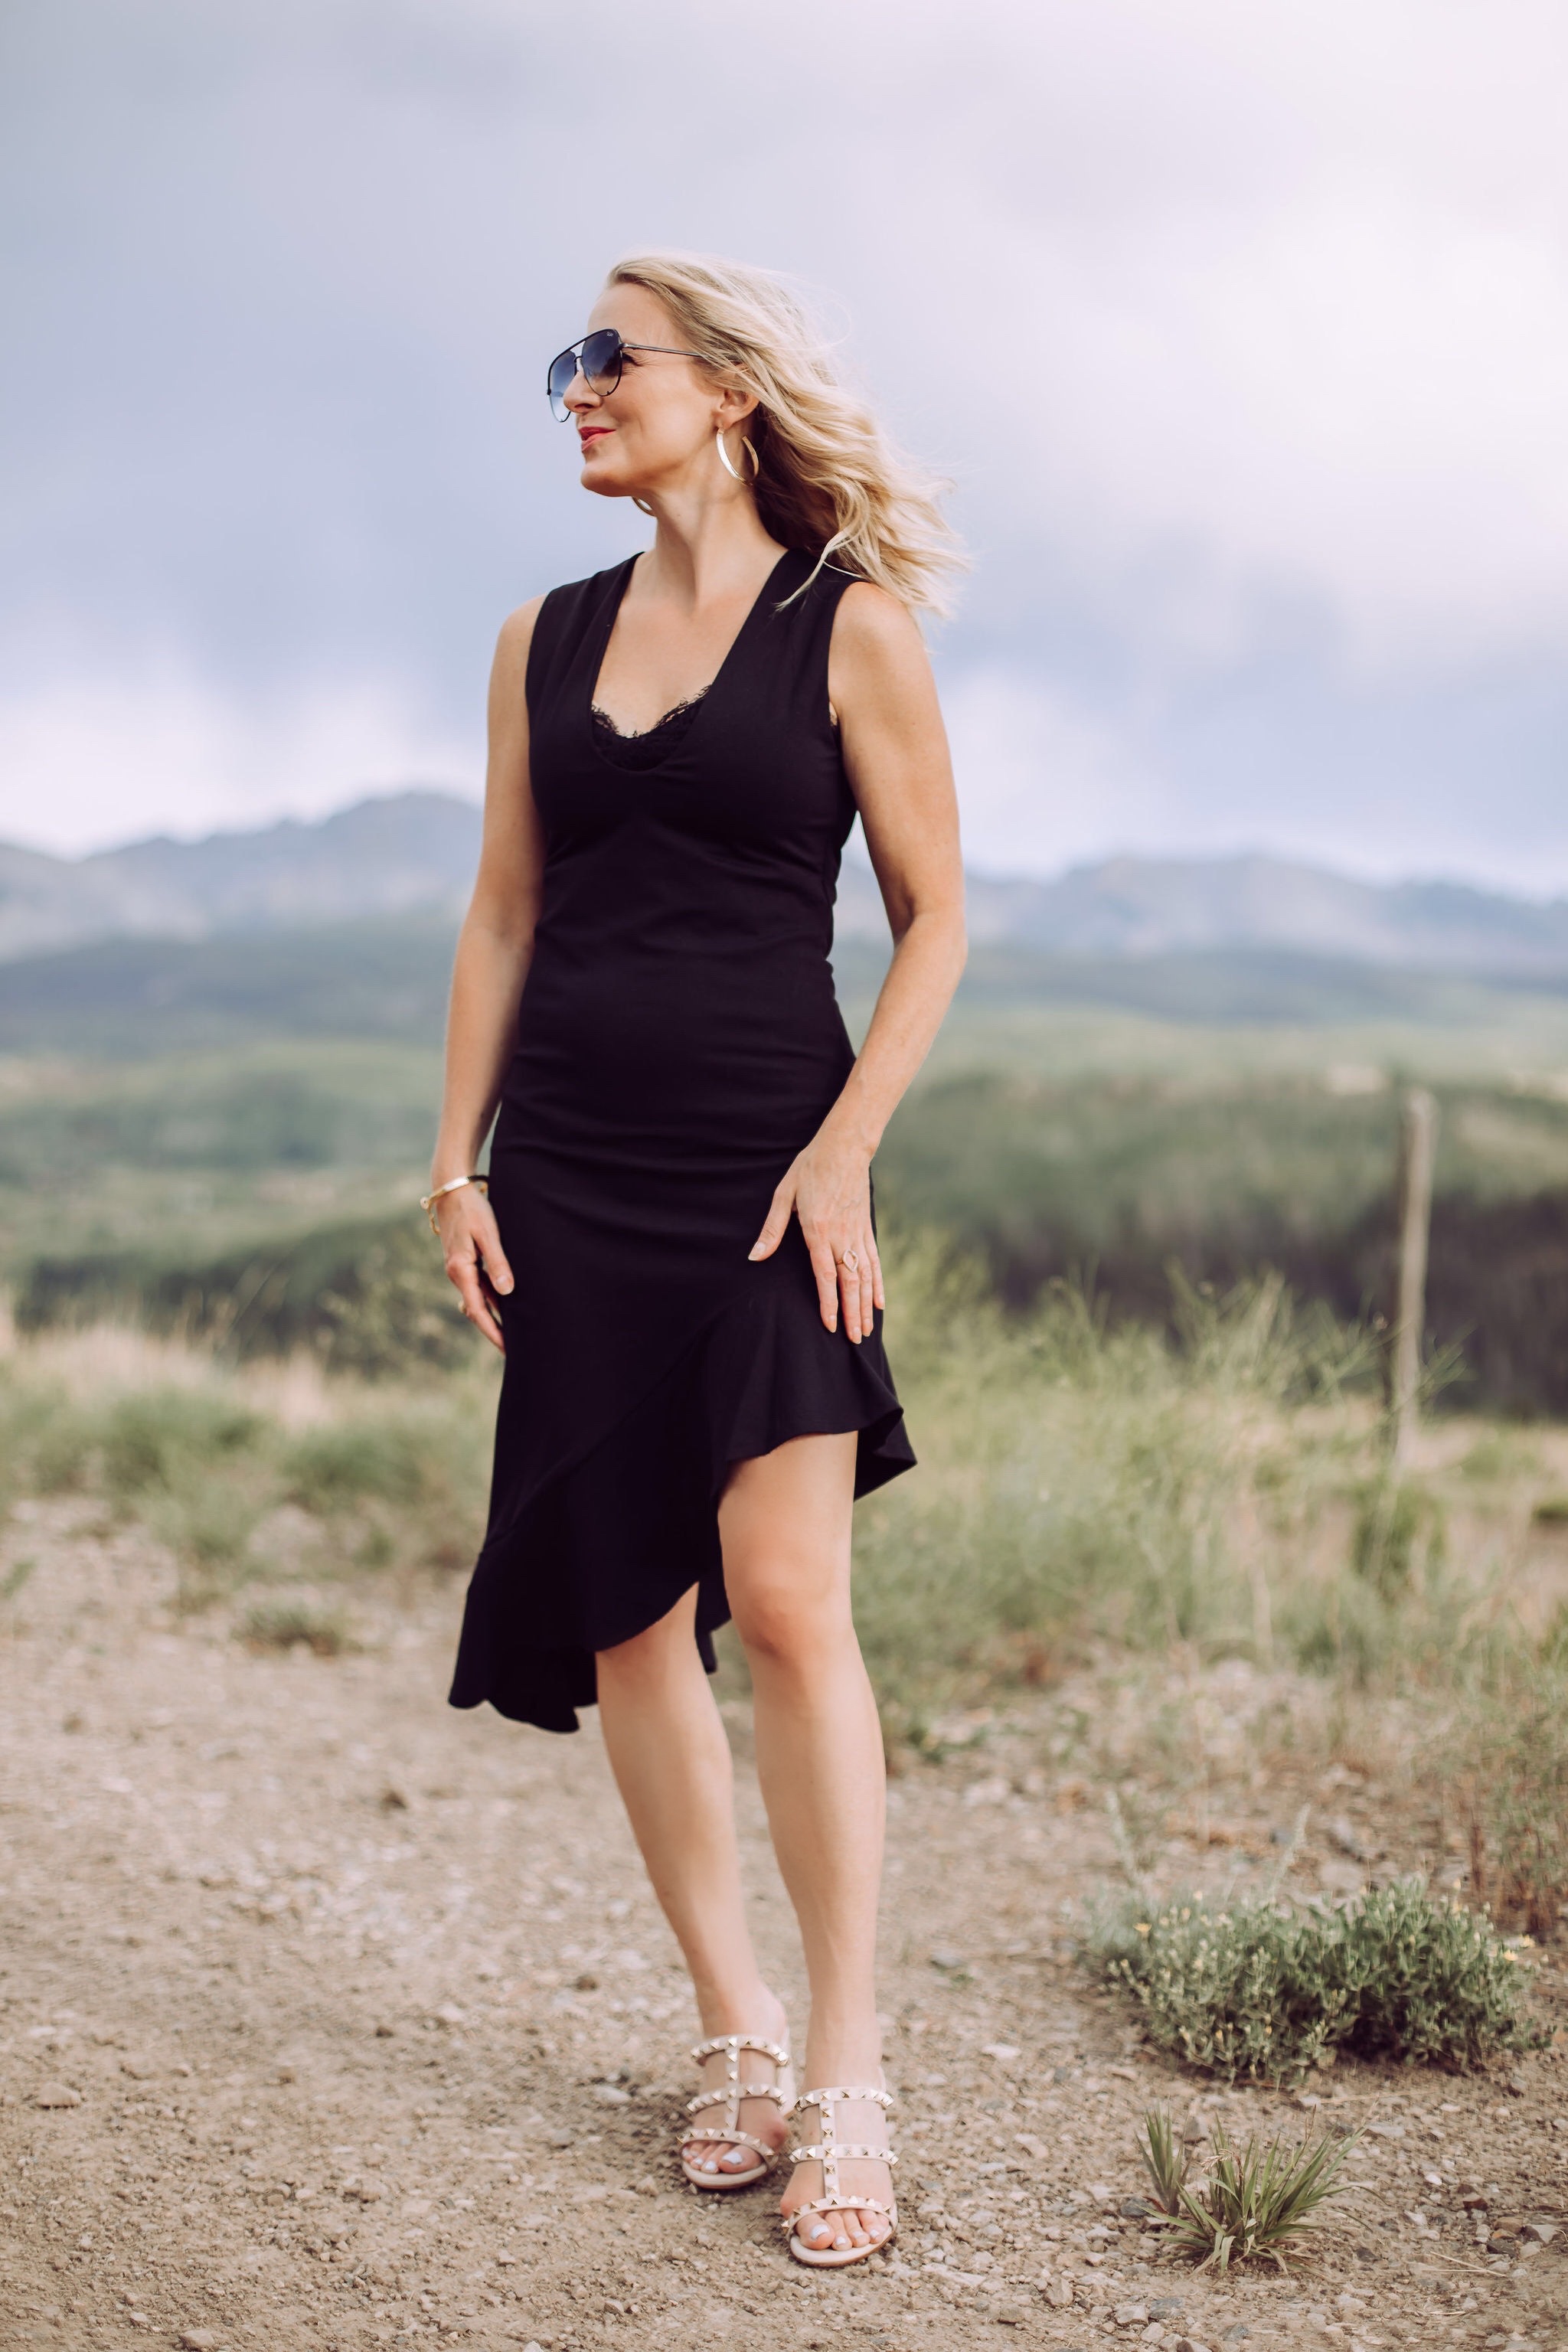 Date Night Outfit Over 40, Fahsion blogger Erin Busbee of Busbee Style wearing a black asymmetrical Susana Monaco dress with lace cami, Valentino Sandals, and QUAY aviator sunglasses in Telluride, Colorado